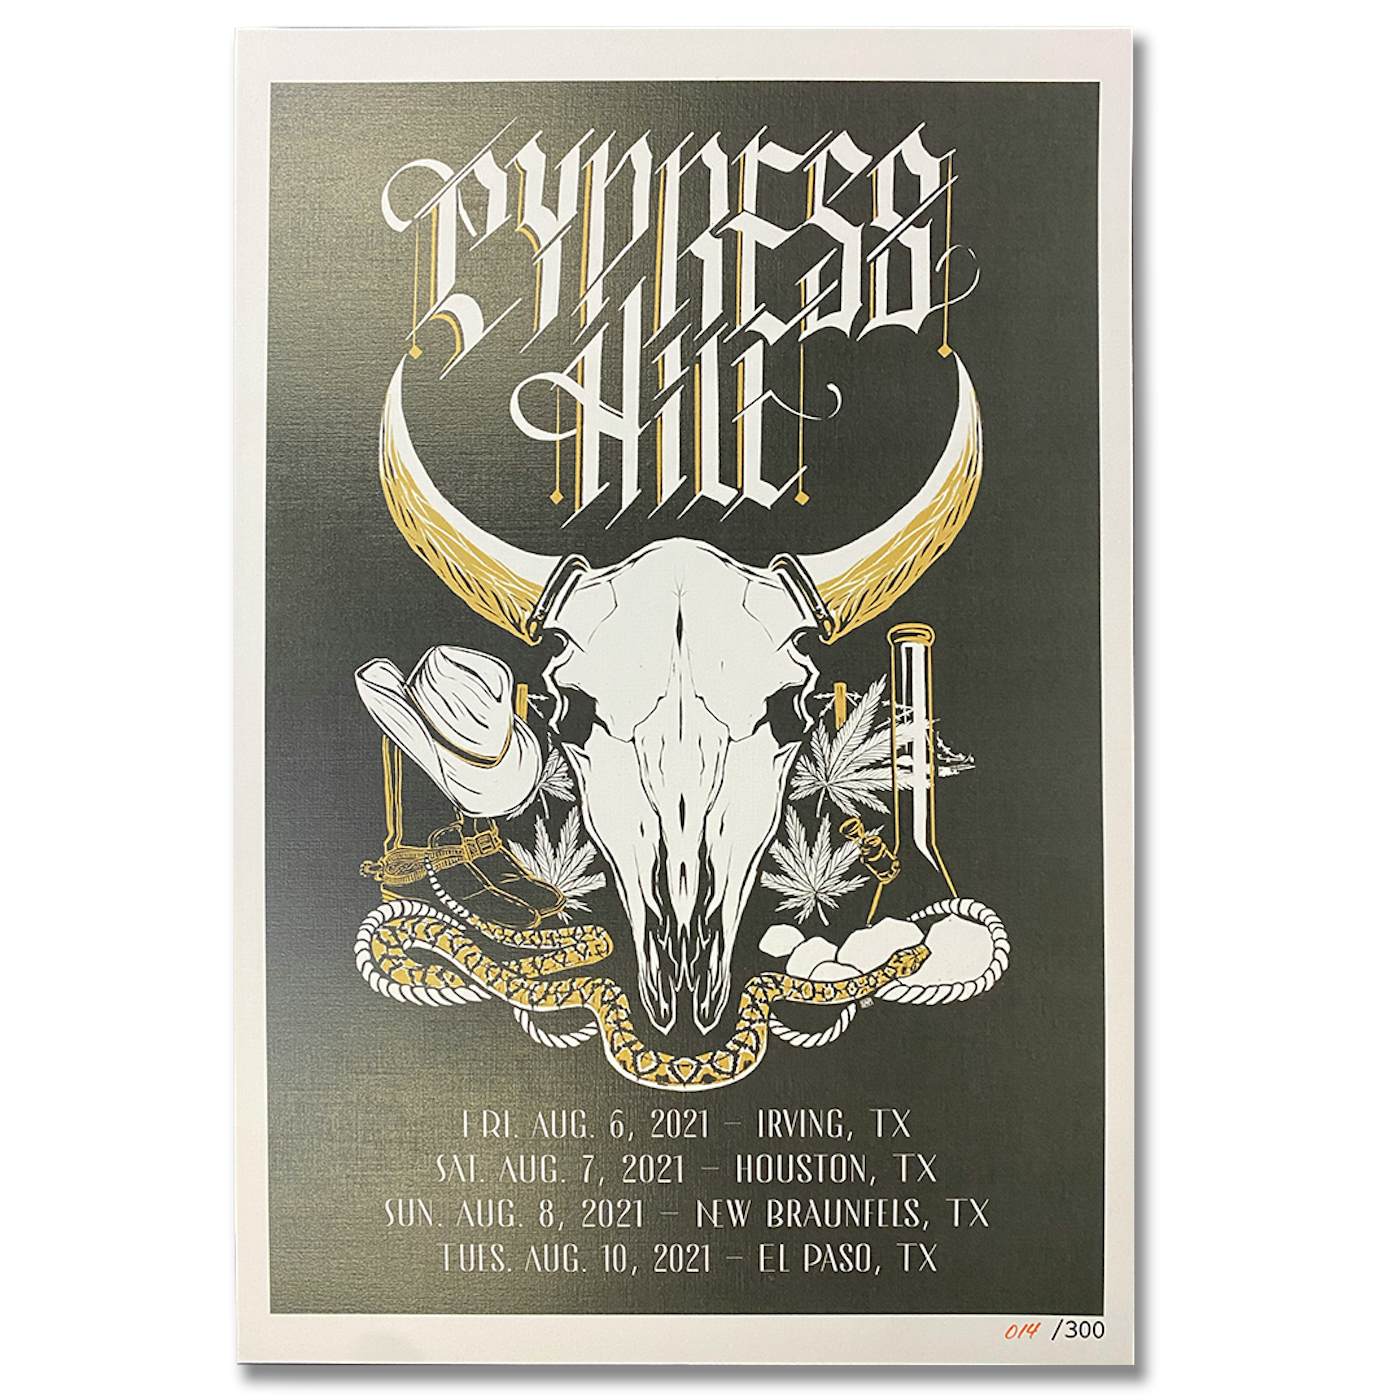 Cypress Hill LIMITED EDITION "Texas Tour Aug 6-10, 2021" Poster